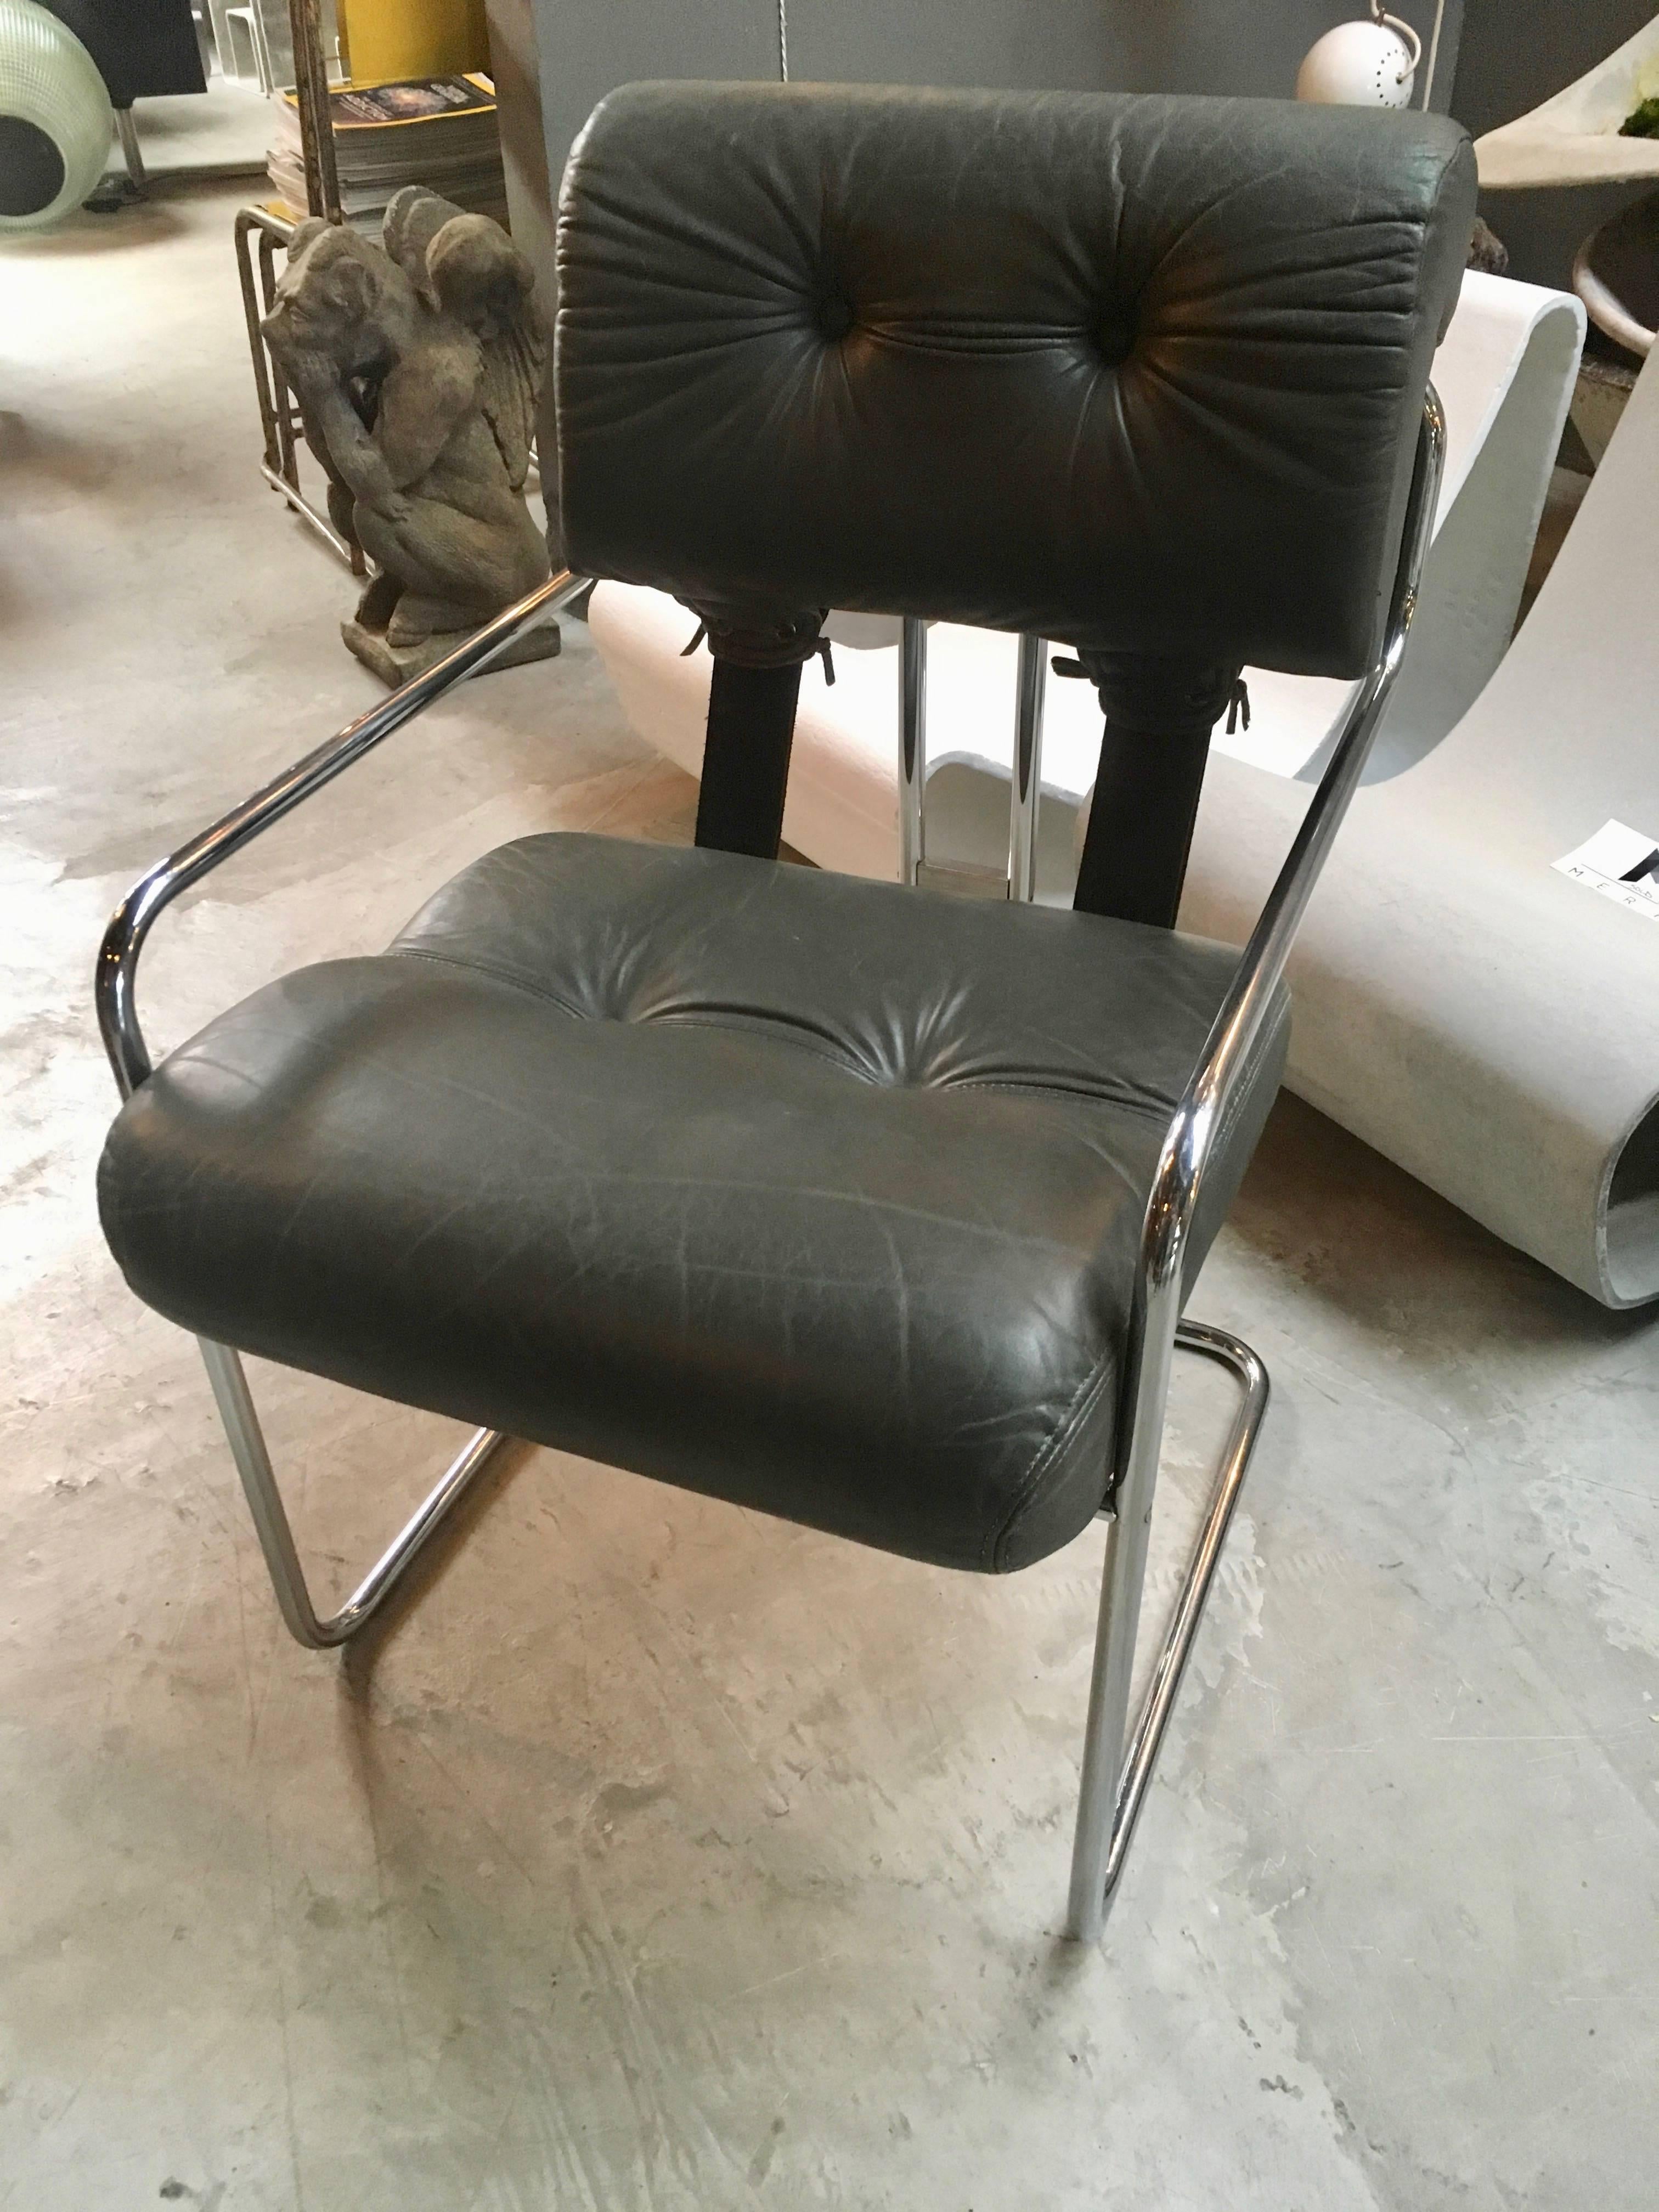 Gorgeous set of six leather chairs by Guido Faleschini for Pace. Chrome chairs with grey leather. Excellent patina to leather. Selling as a set of six. Extremely comfortable chairs. Perfect at a dining table, conference table or as desk chairs.